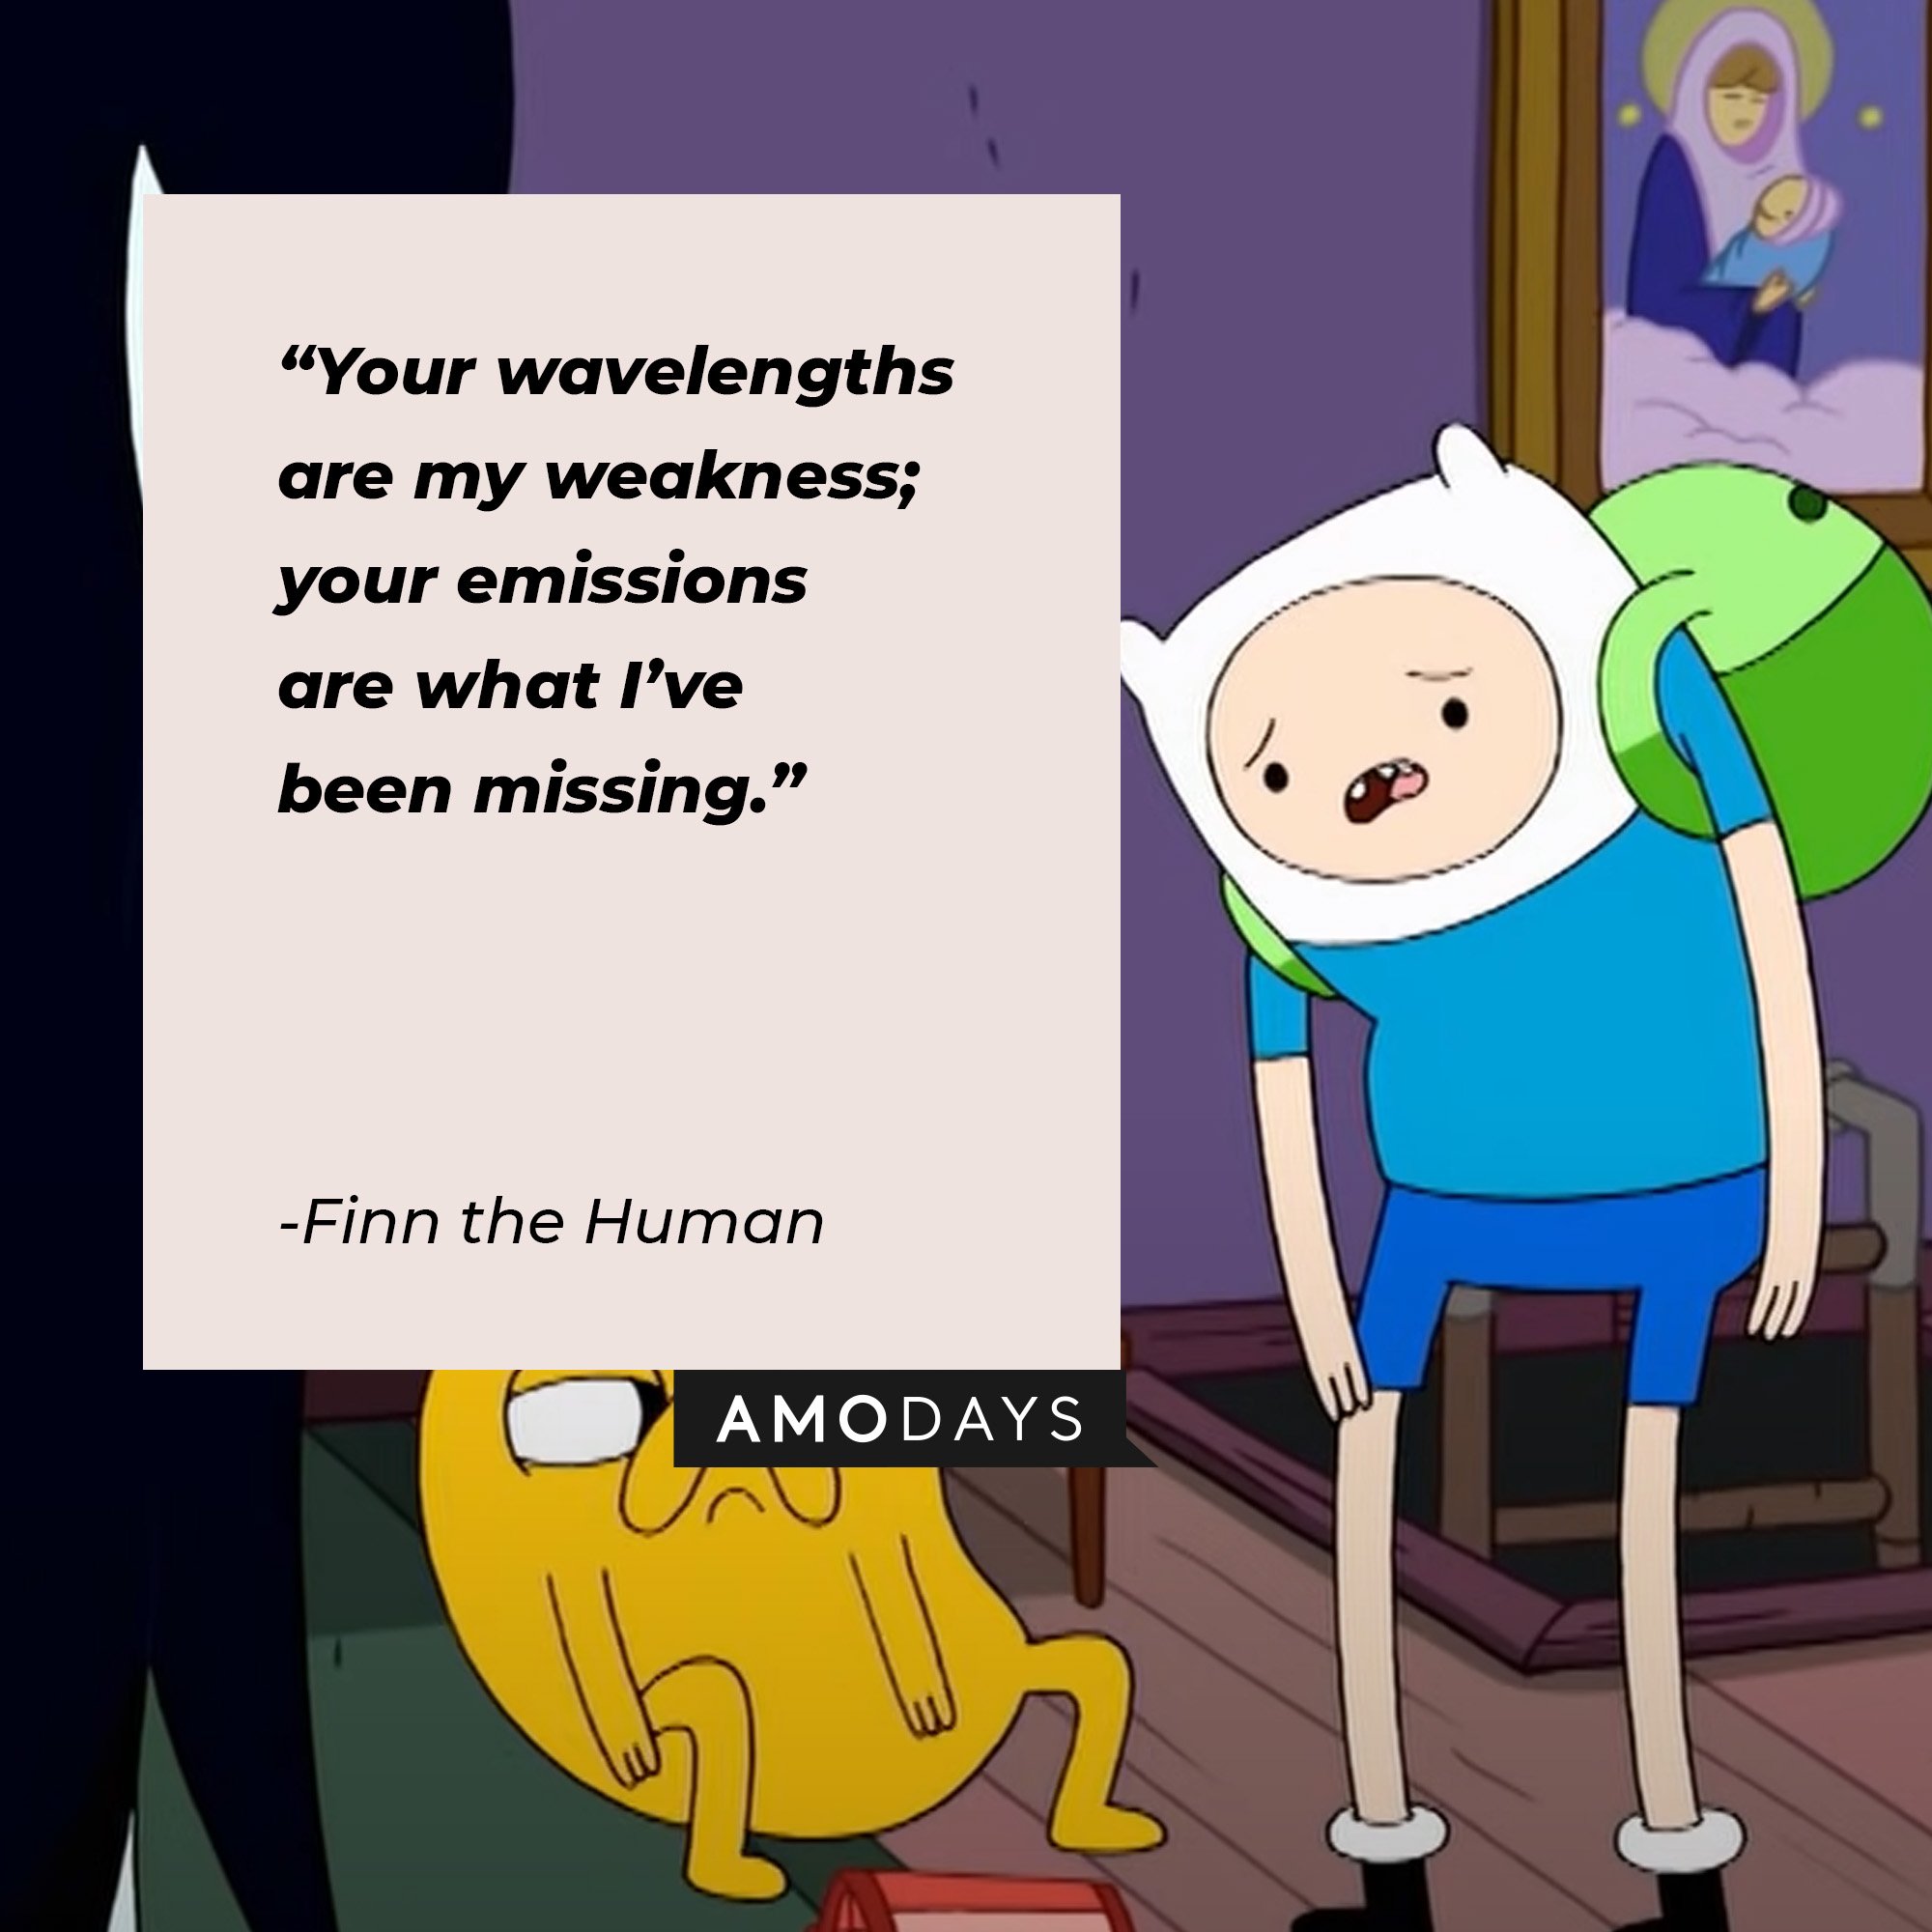 Finn the Human’s quote: “Your wavelengths are my weakness; your emissions are what I’ve been missing.” | Image: AmoDays